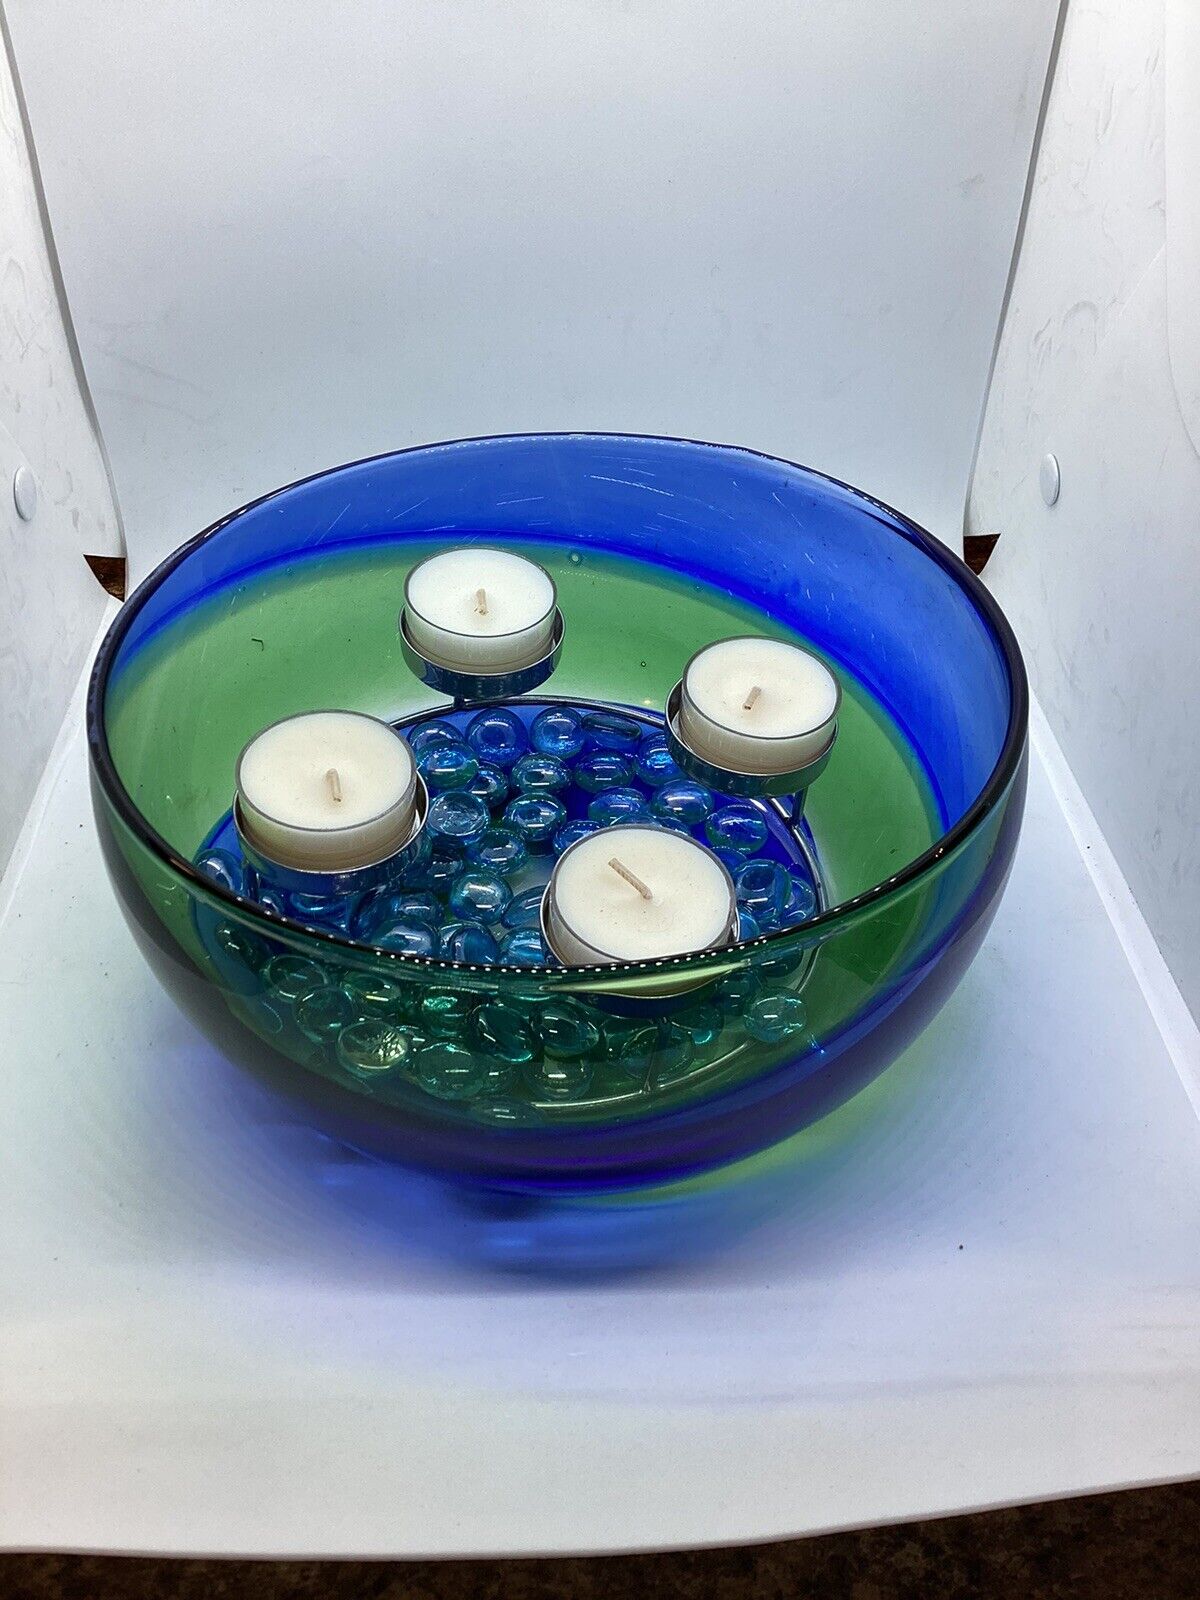 PartyLite Spring Art Glass Bowl W/ Votives, P92079, Handcrafted In Poland